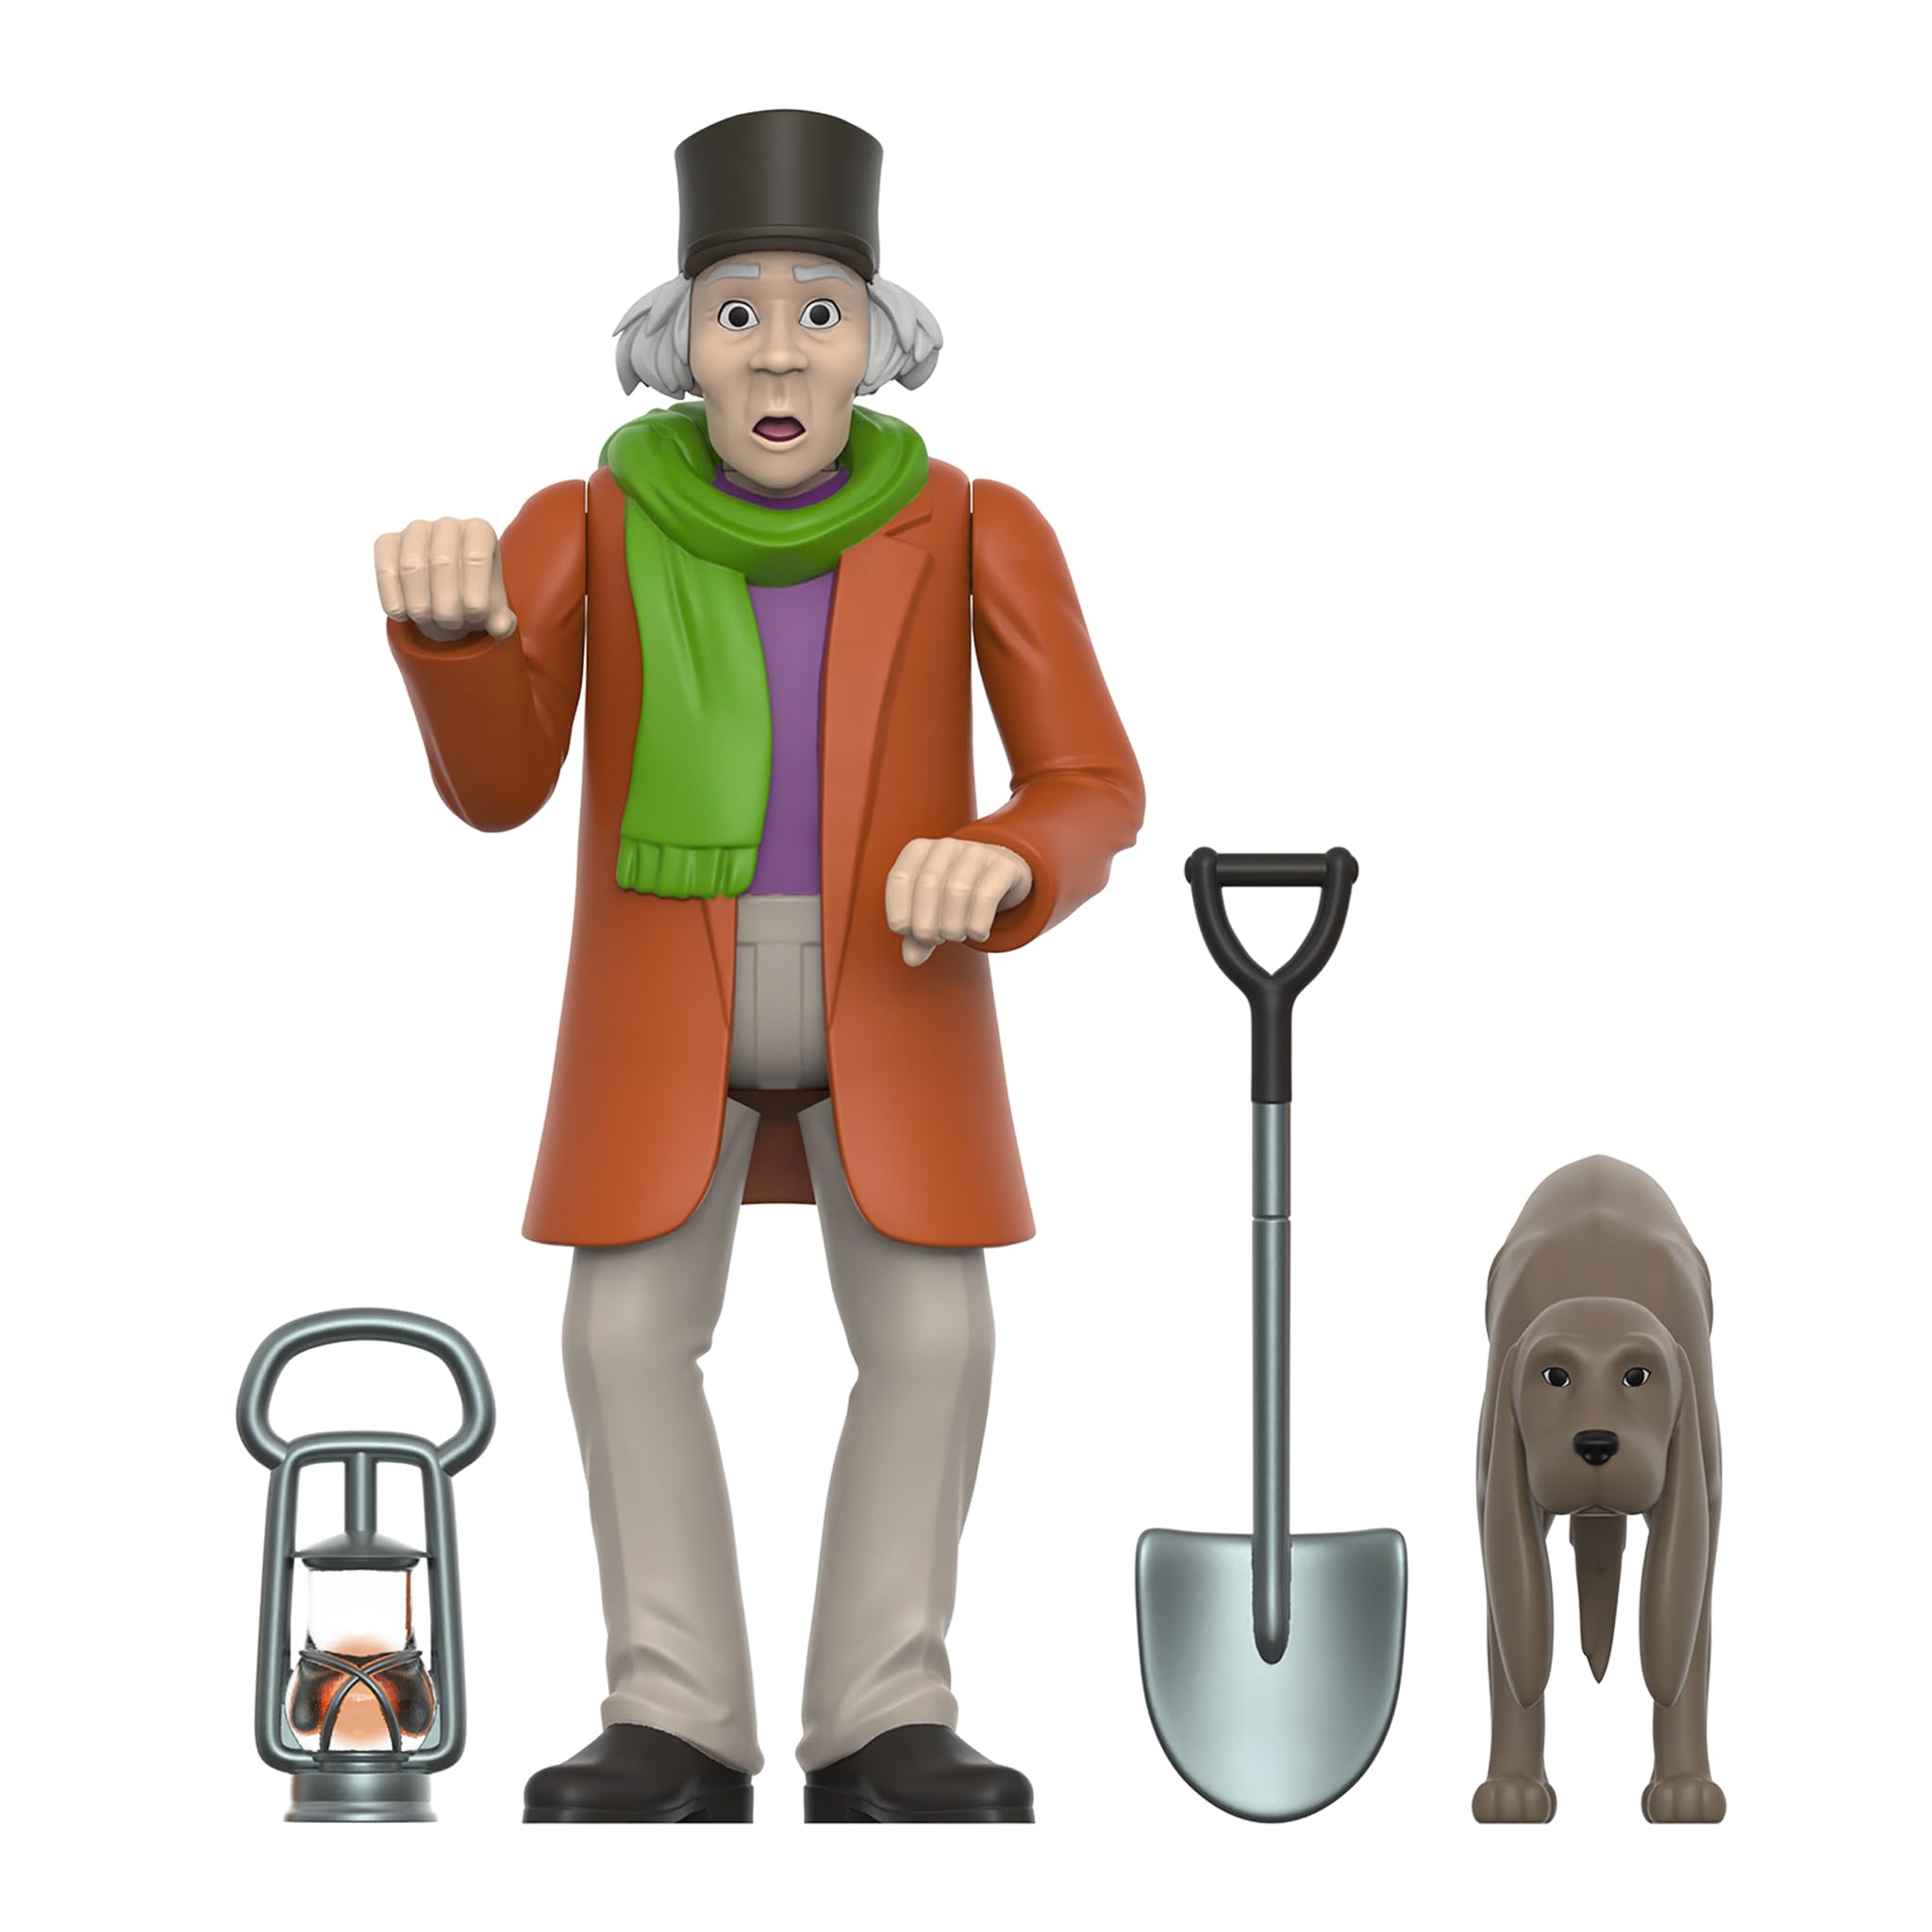 Super7 Disney Haunted Mansion Caretaker - 3.75" Disney Action Figure with Accessories Classic Disney Collectibles and Retro Toys